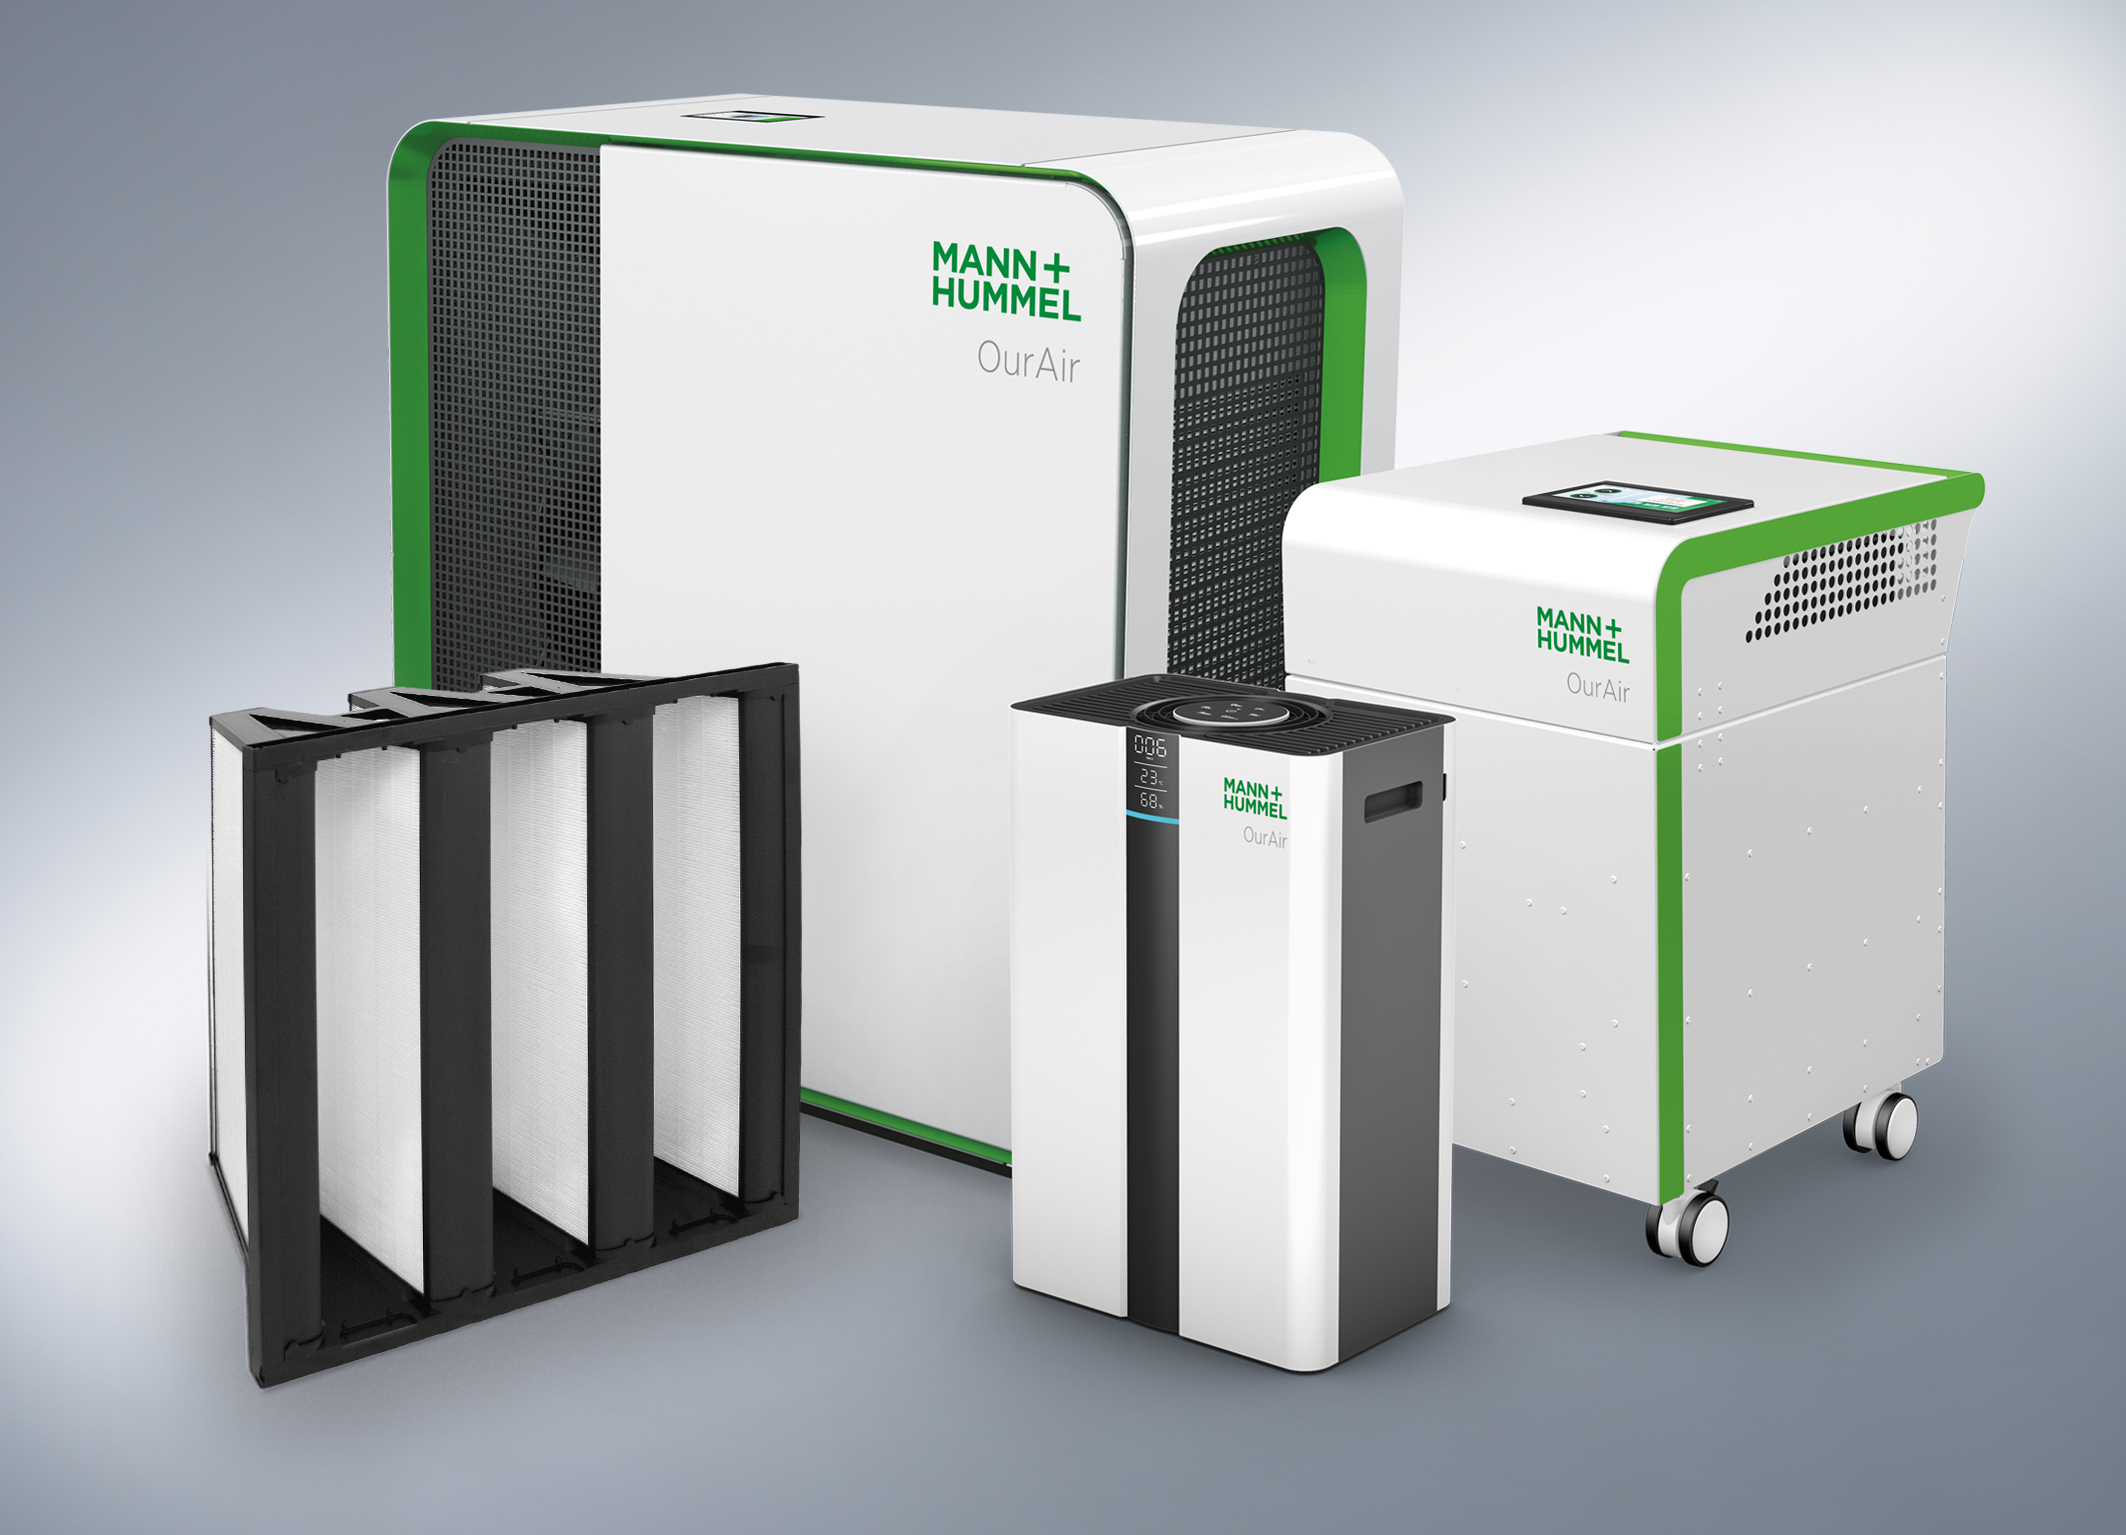 Mann+Hummel will be exhibiting its HEPA air filters and air purifiers at ISH digital.